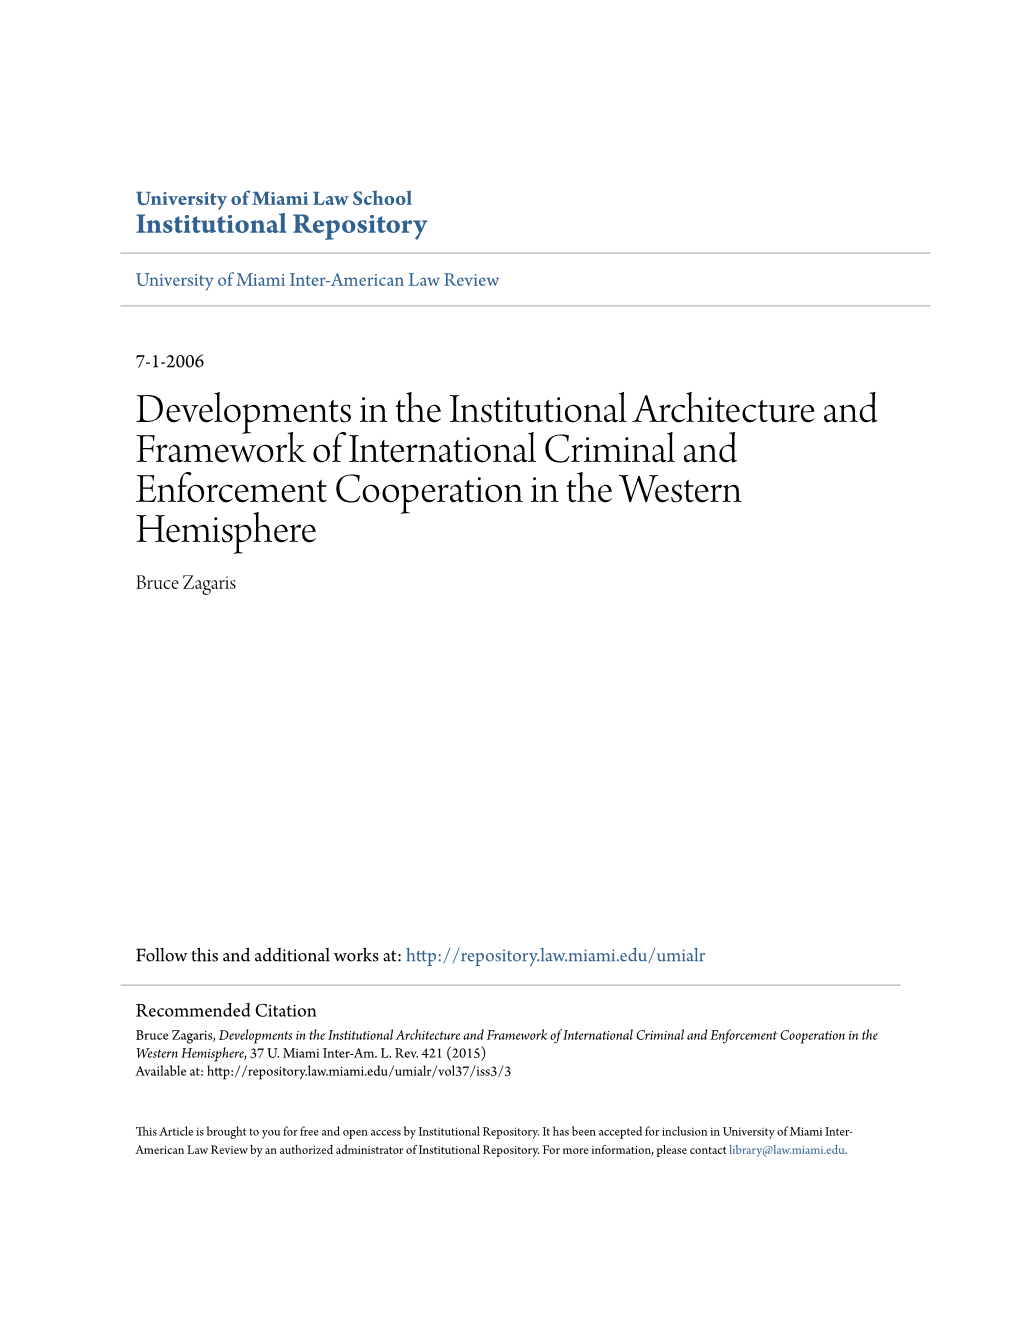 Developments in the Institutional Architecture and Framework of International Criminal and Enforcement Cooperation in the Western Hemisphere Bruce Zagaris